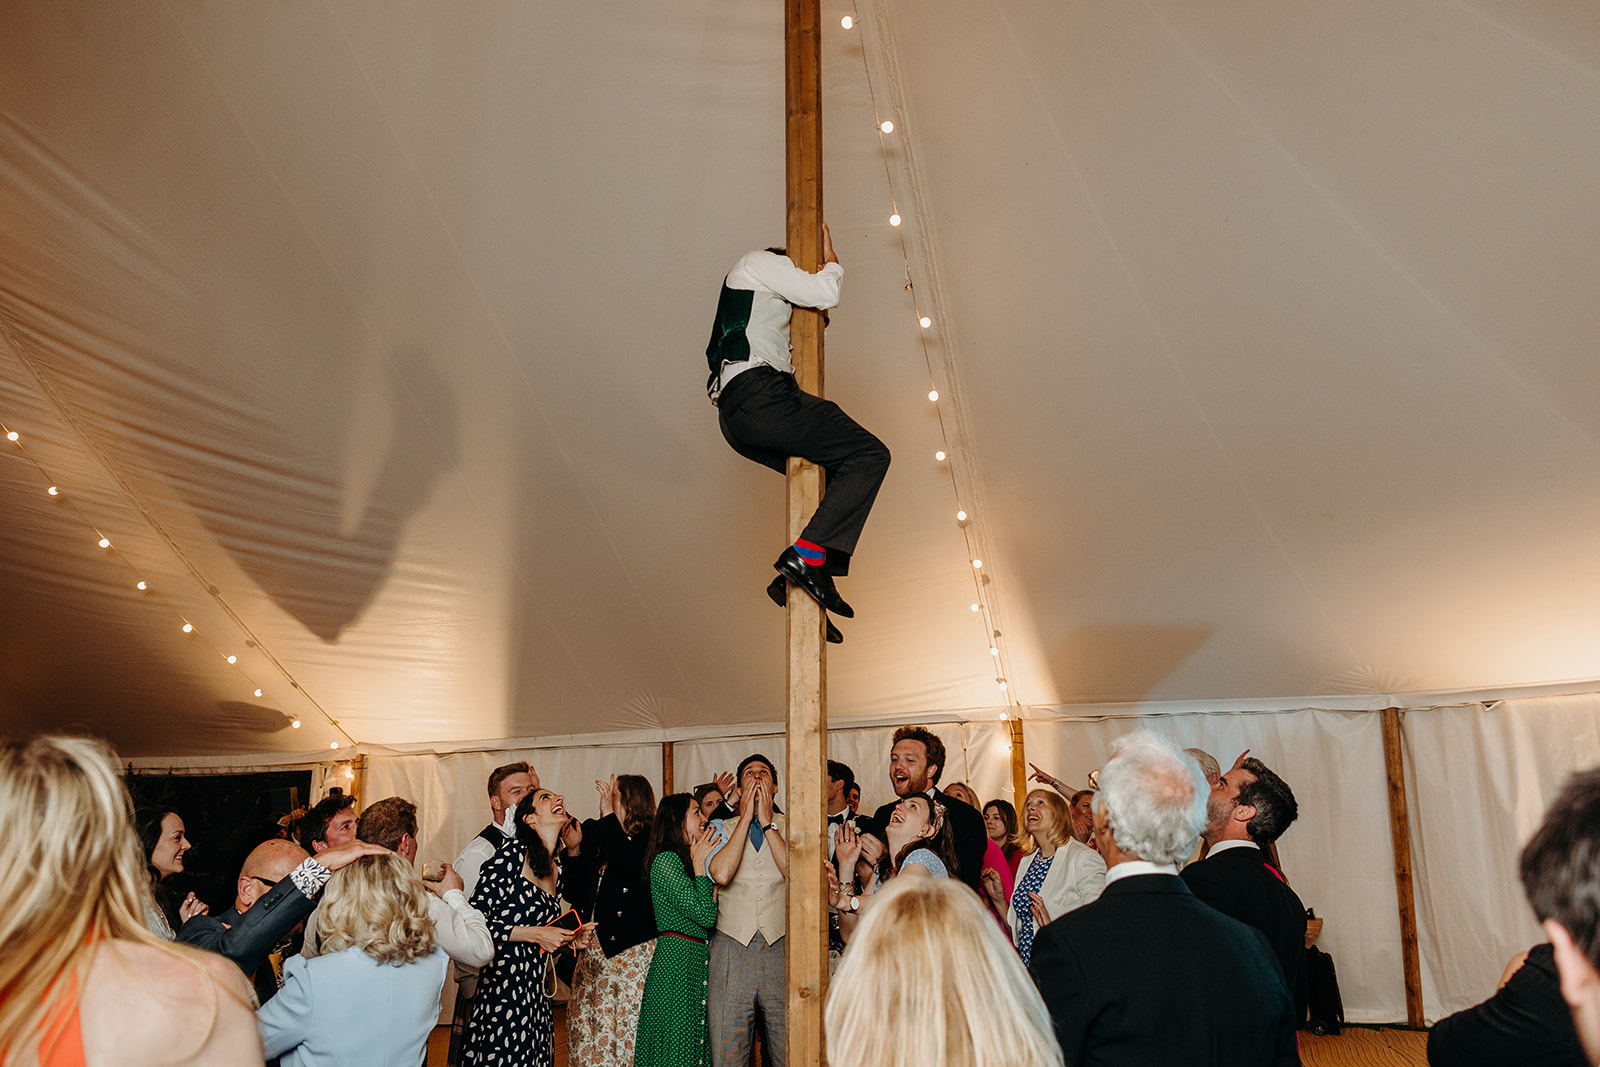 Guests scaling the marquee poles in a display of revelry at the East Sussex wedding.